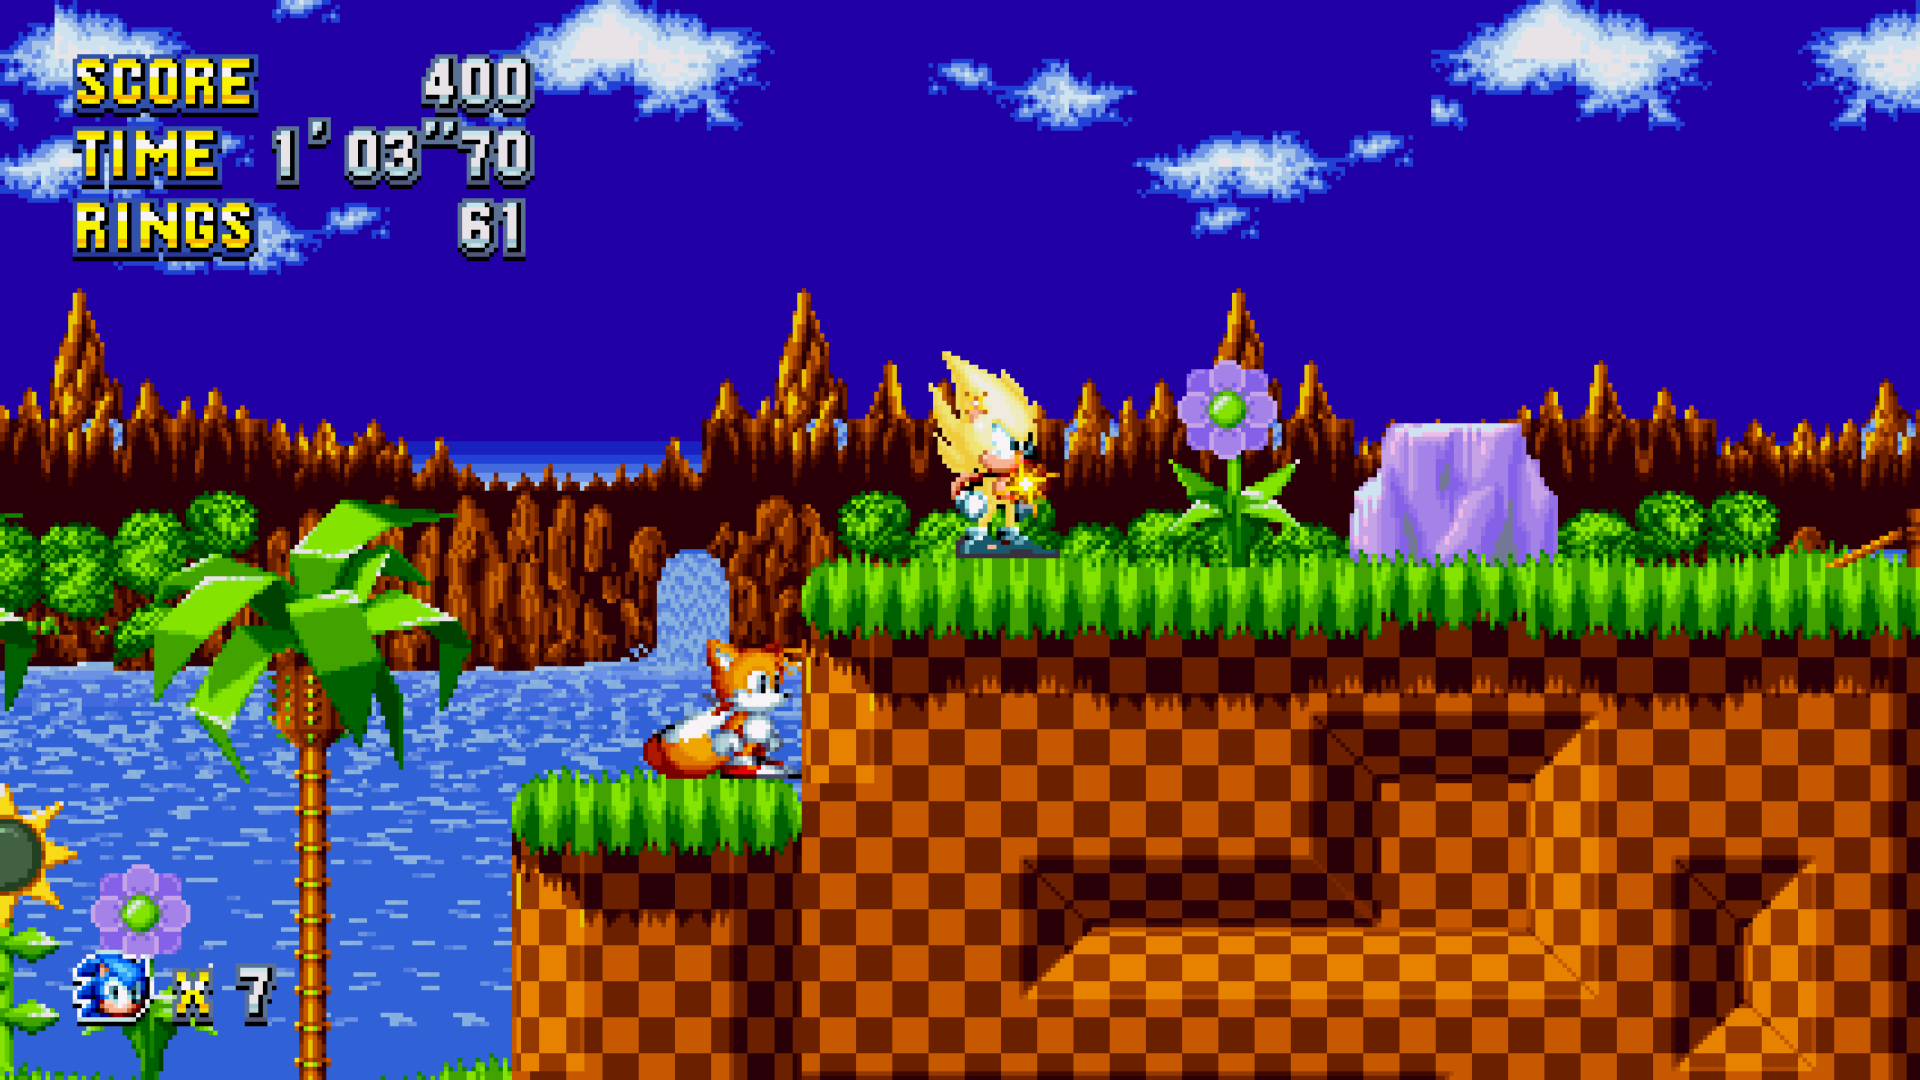 Image 6 - A New Shoes For Sonic mod for Sonic Mania - Mod DB